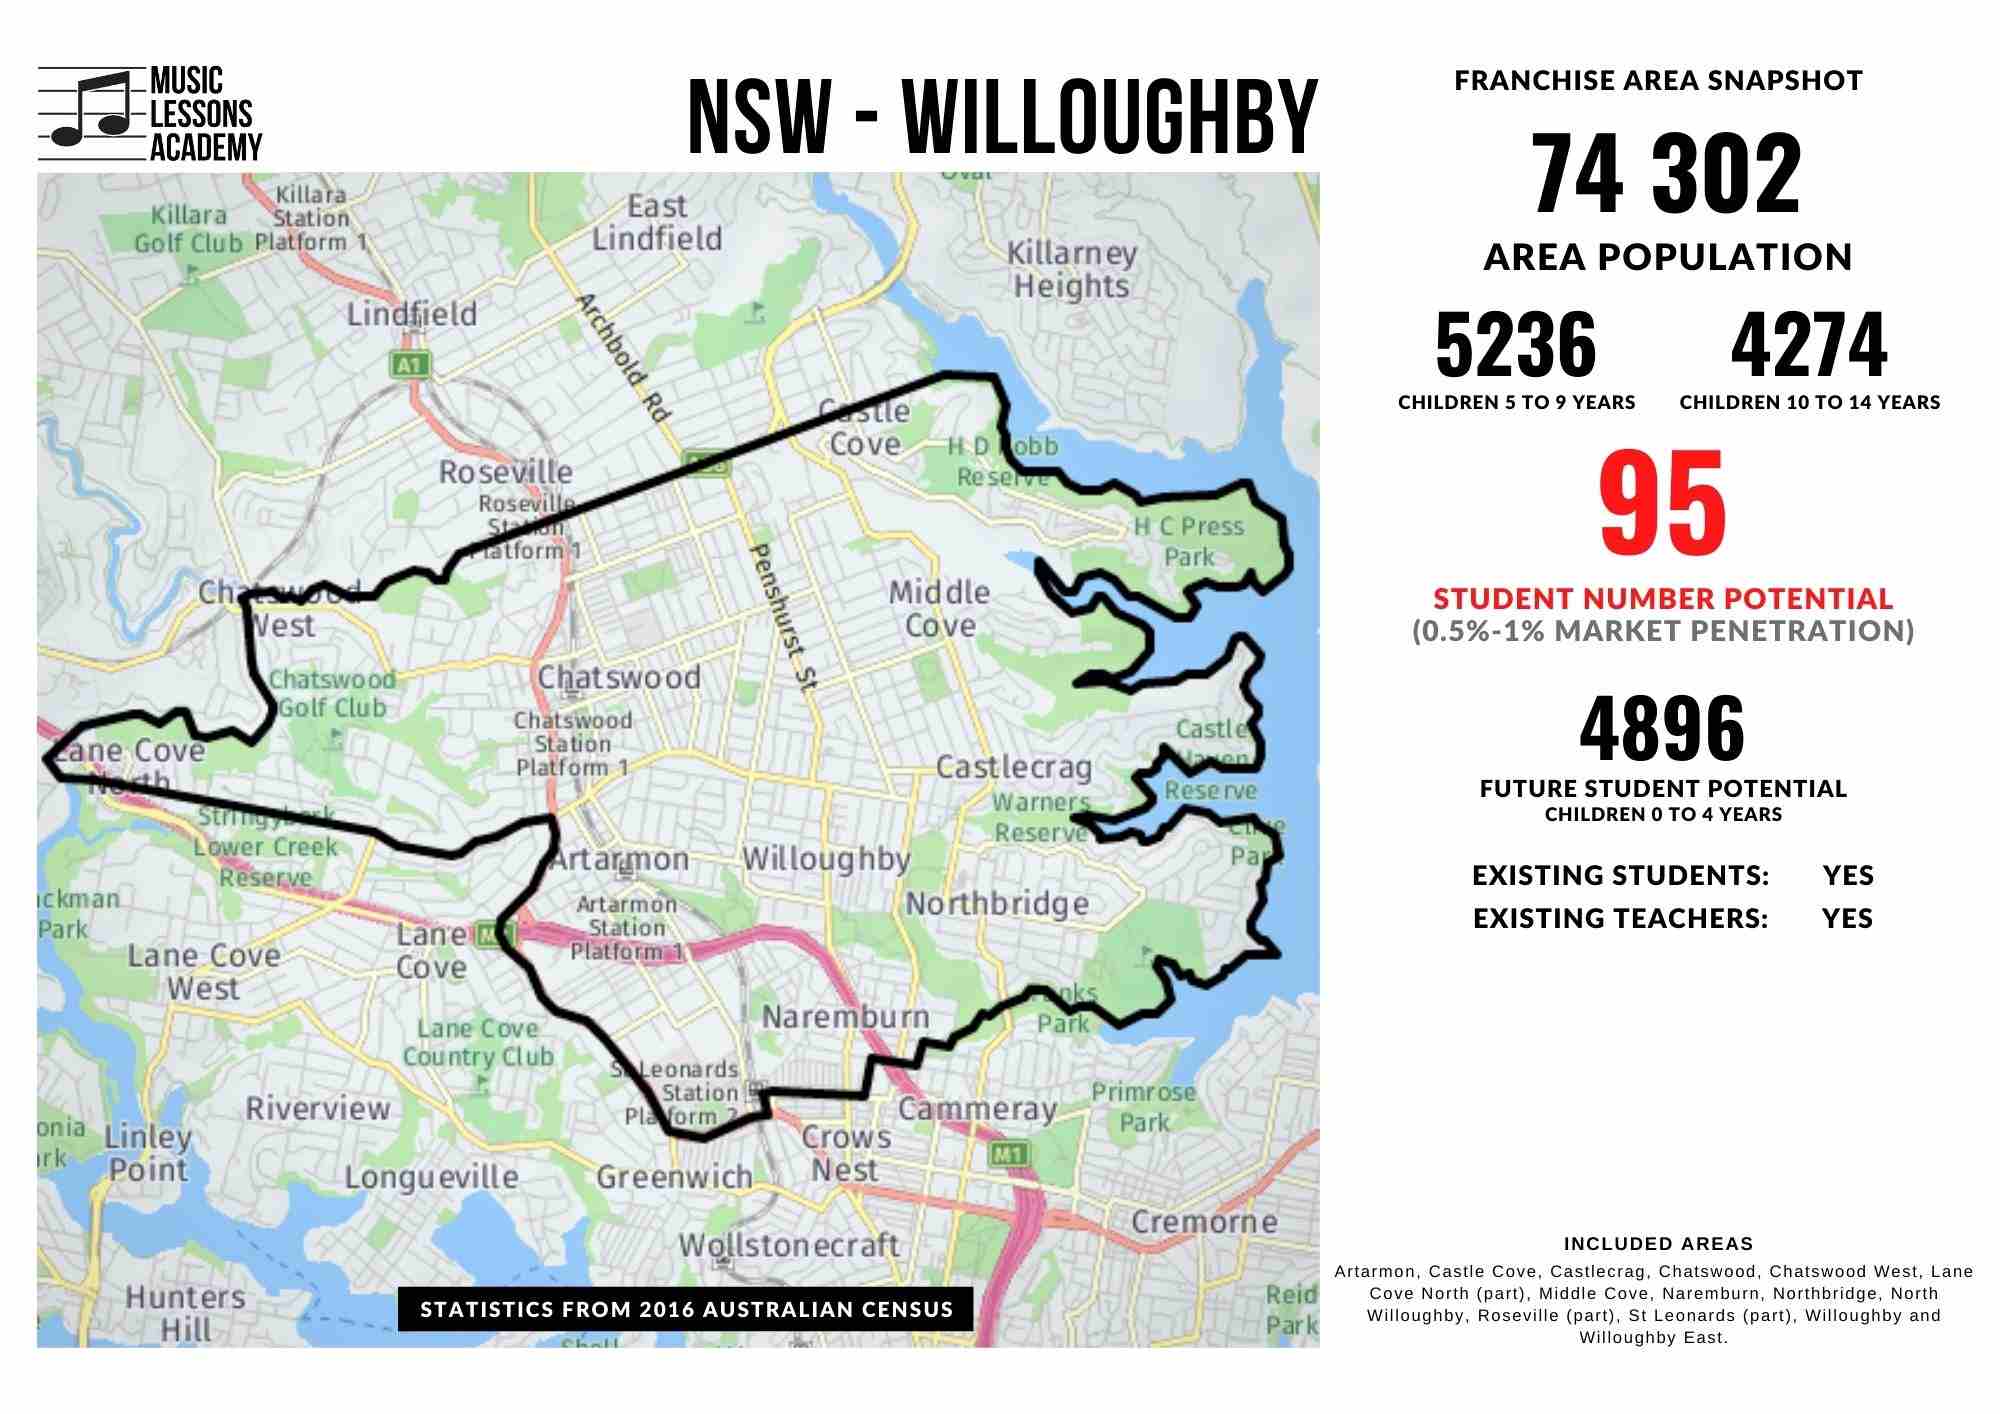 NSW Willoughby Franchise for sale